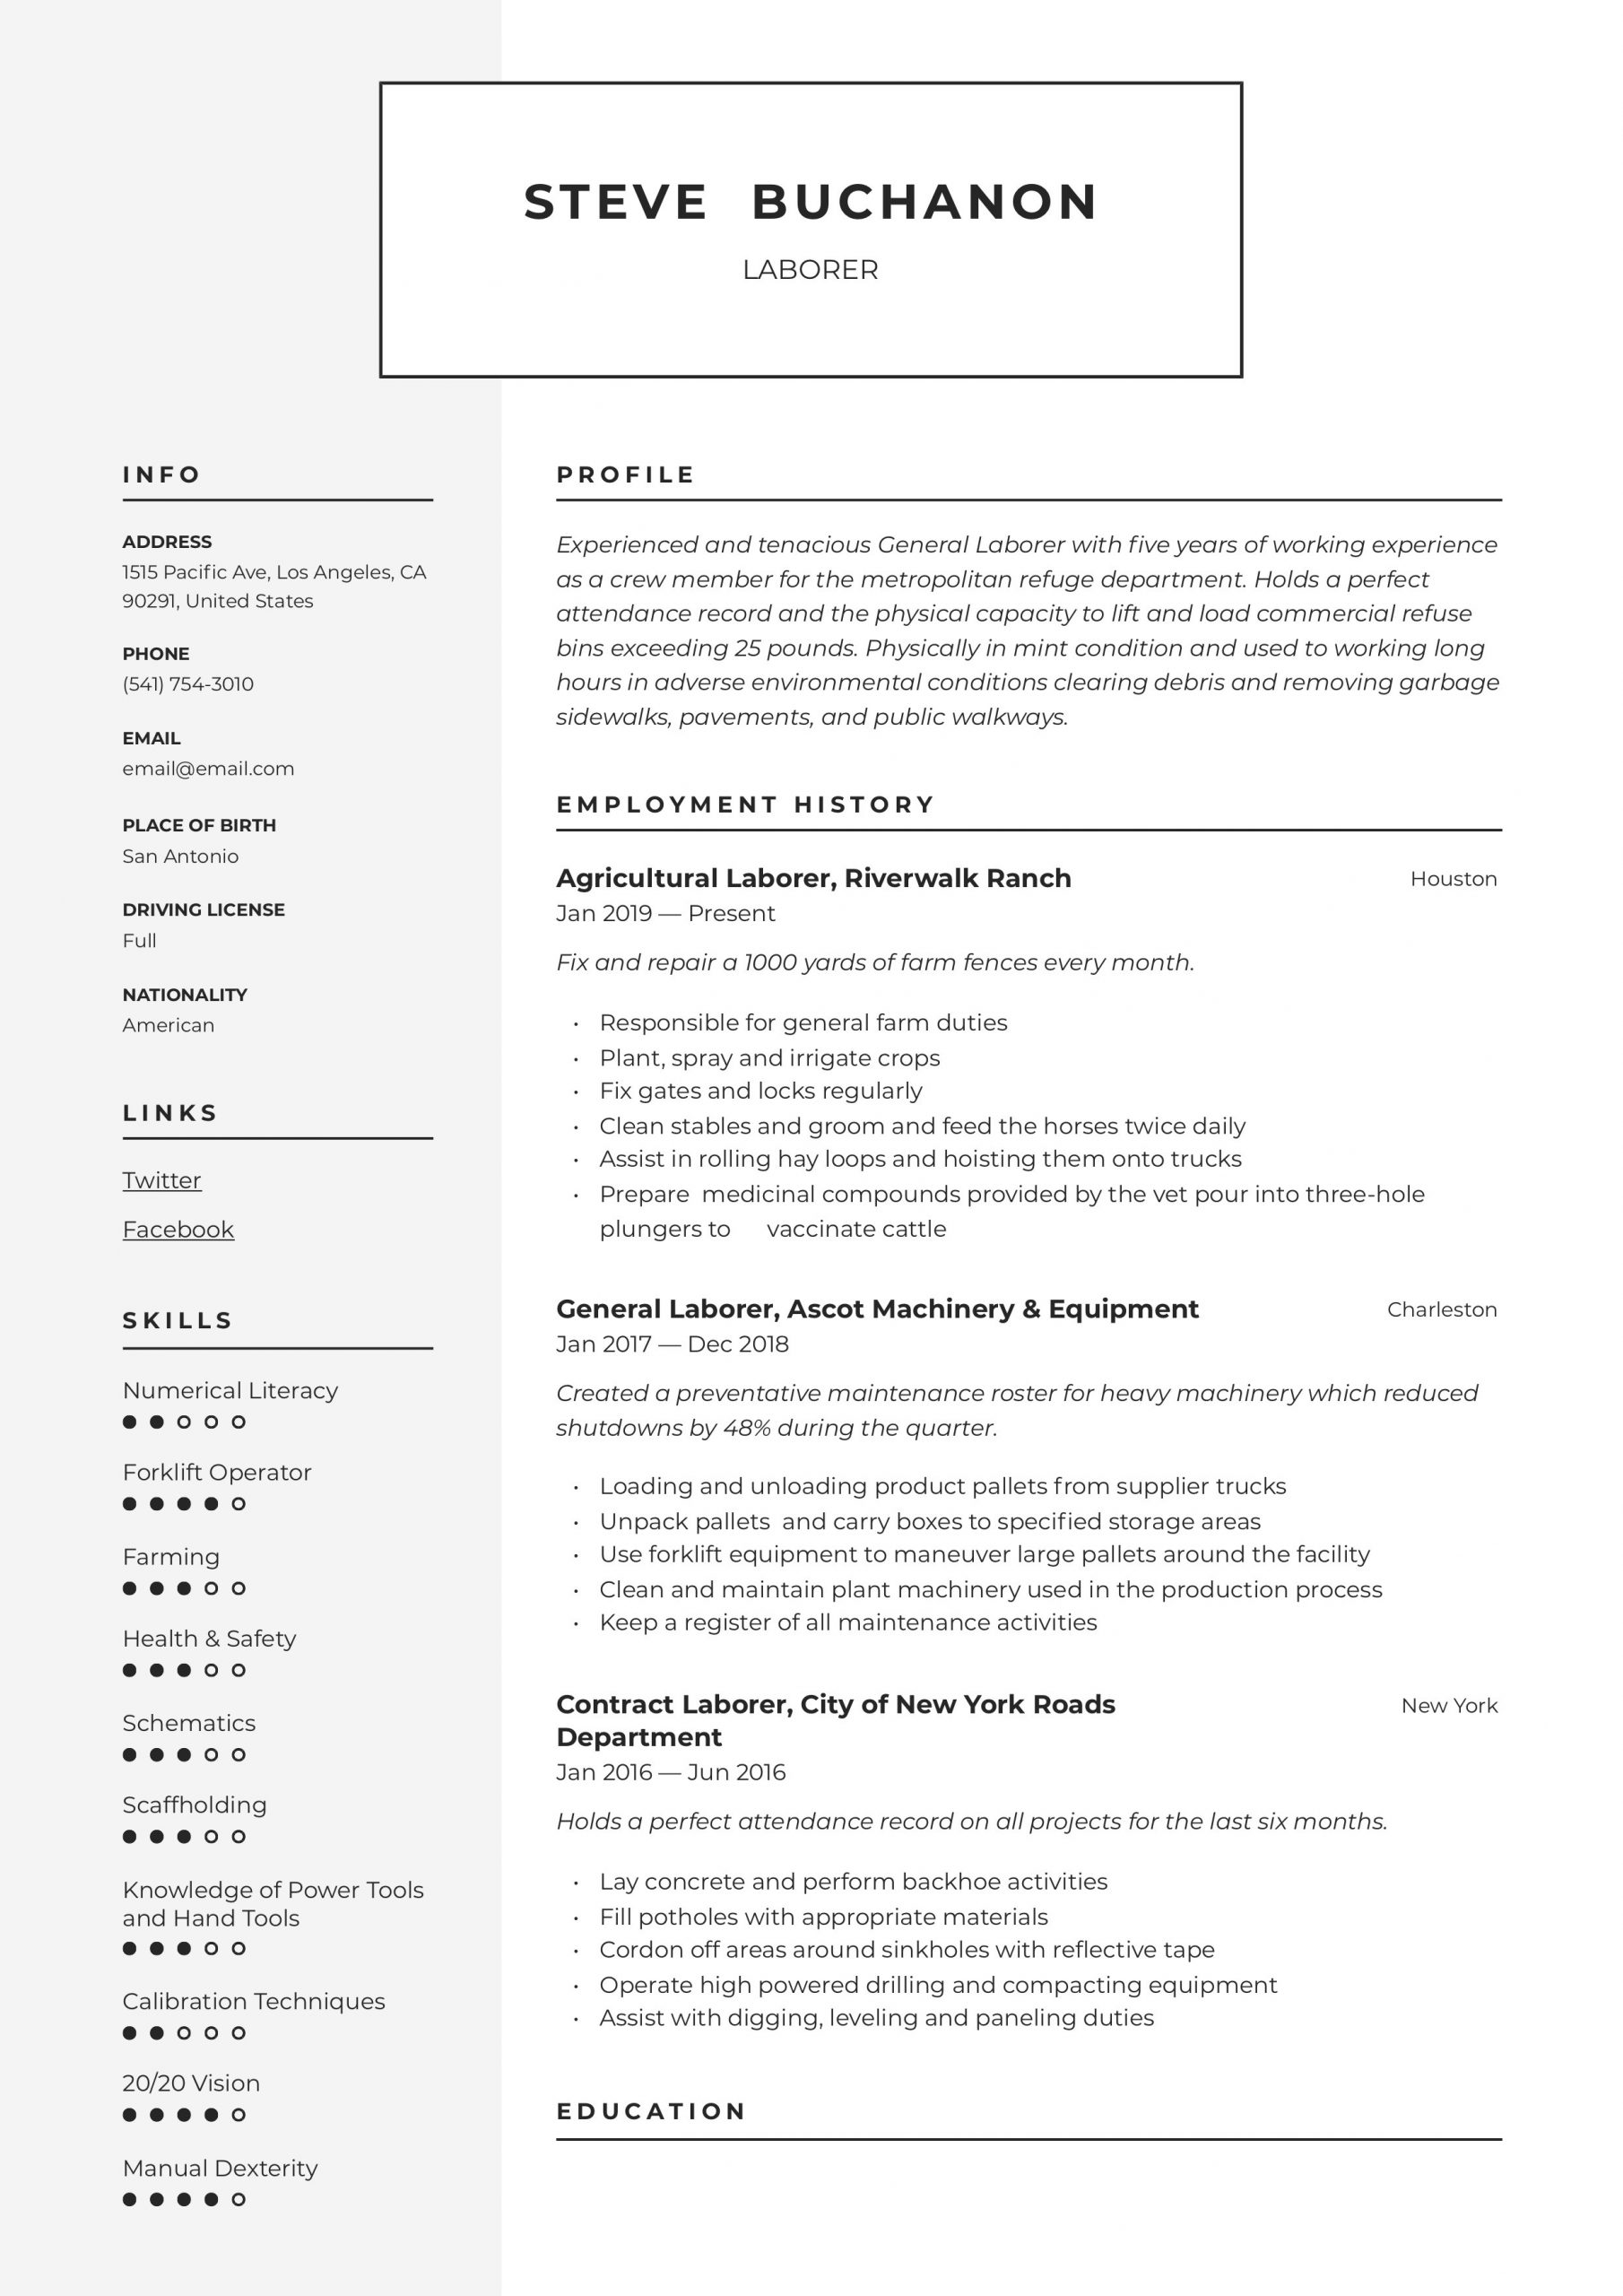 Sample Resume Objectives for General Labor General Laborer Resume & Writing Guide  12 Free Templates 2020